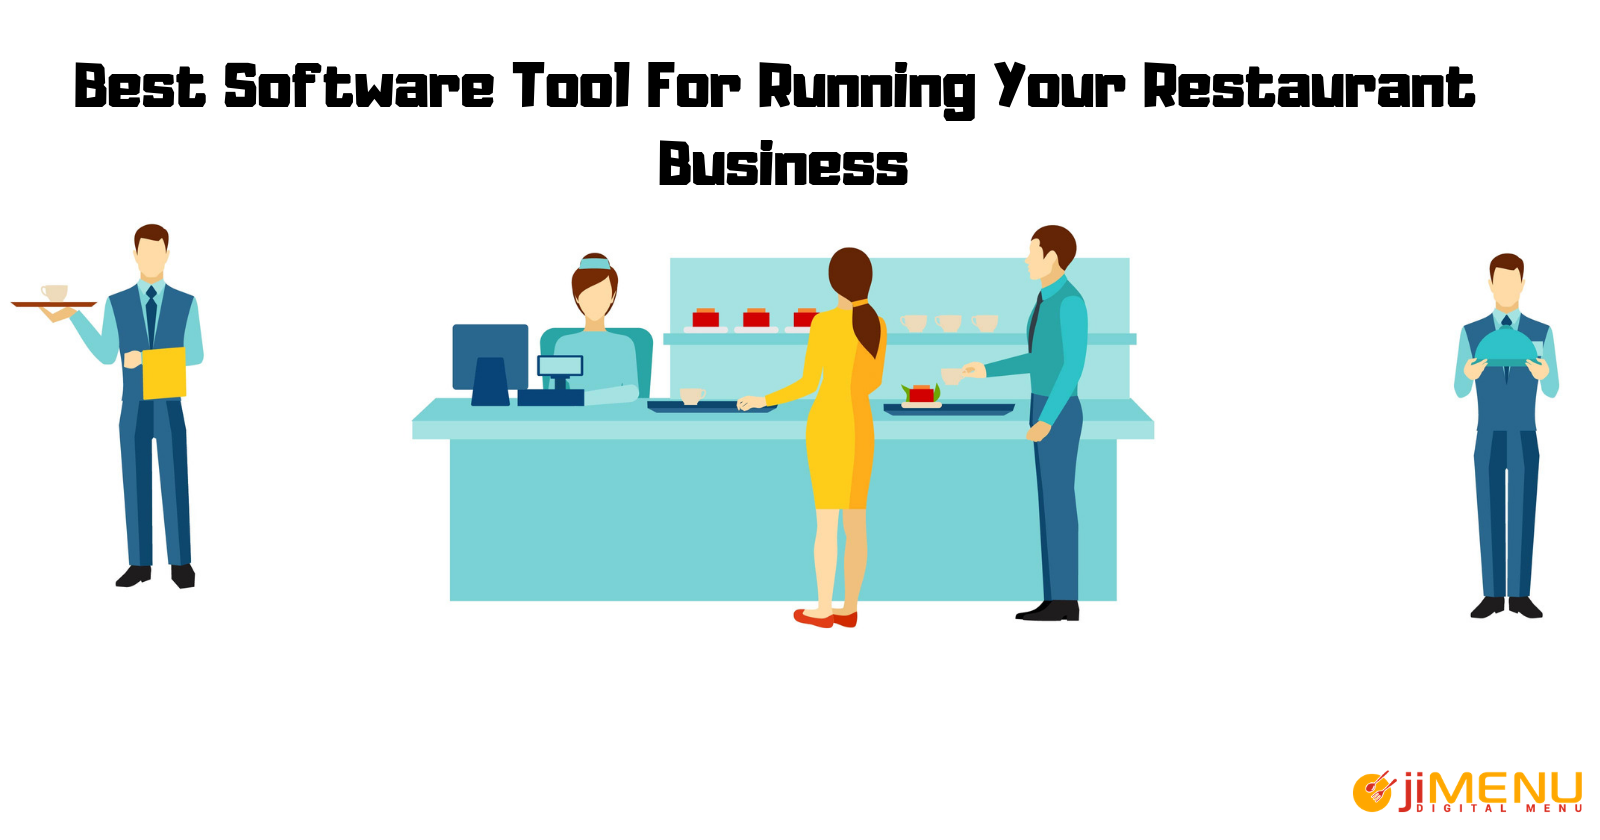 Trending Software Tools For Running Your Restaurant Business